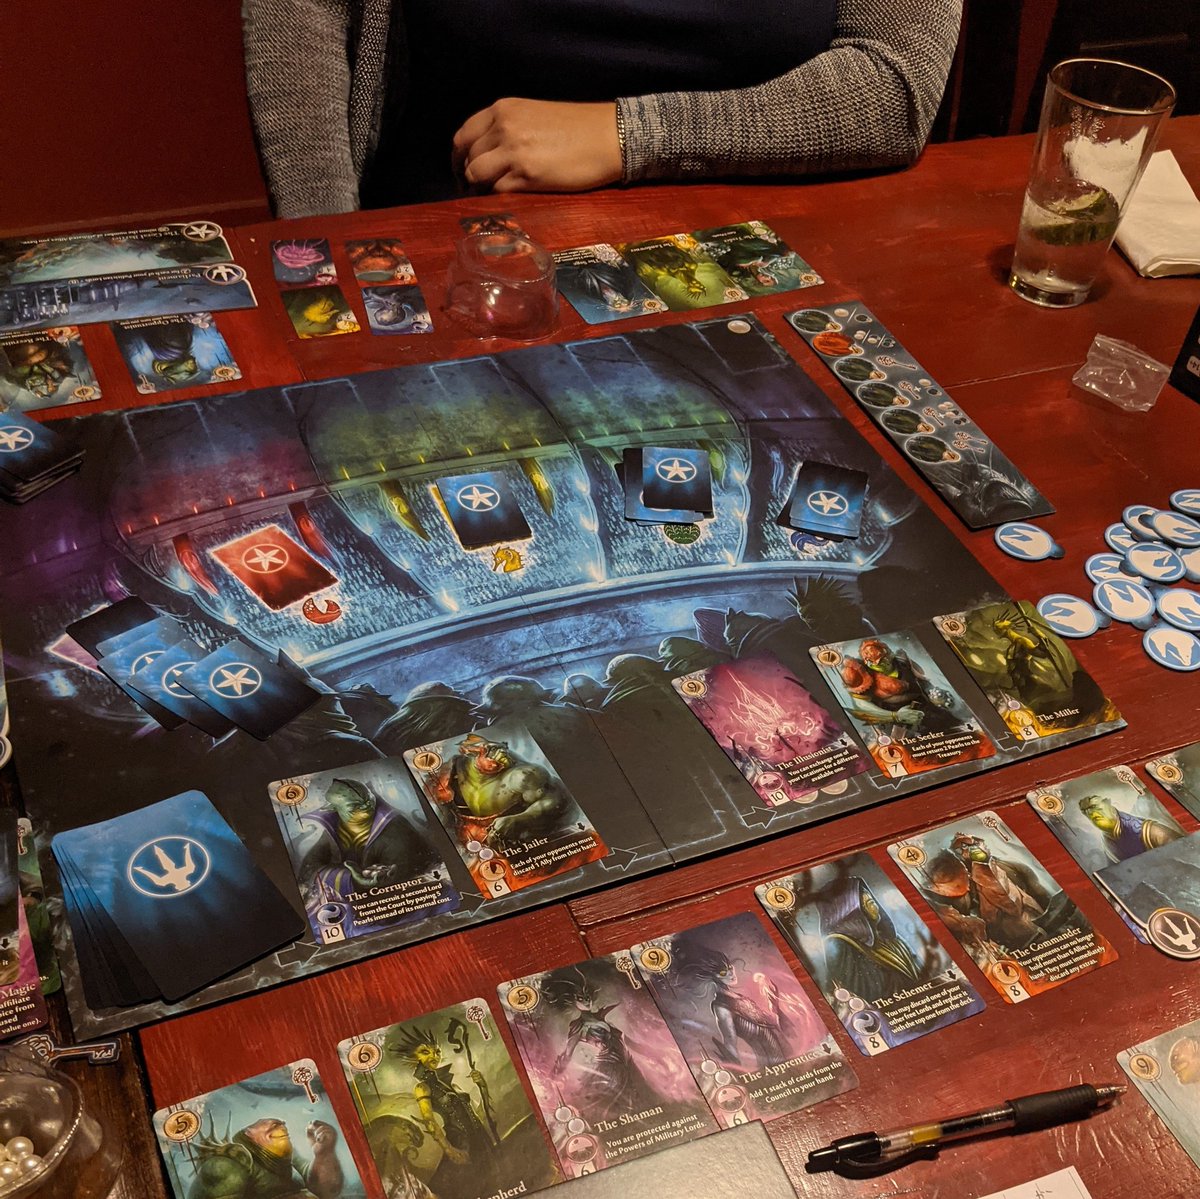 Enjoying @StudioBombyx #Abyss #boardgame as #TeamRedshirt gets ready for the @GamersEngaged #Gauntletofgames fundraiser tourney happening on 5/19 💙🏆💙